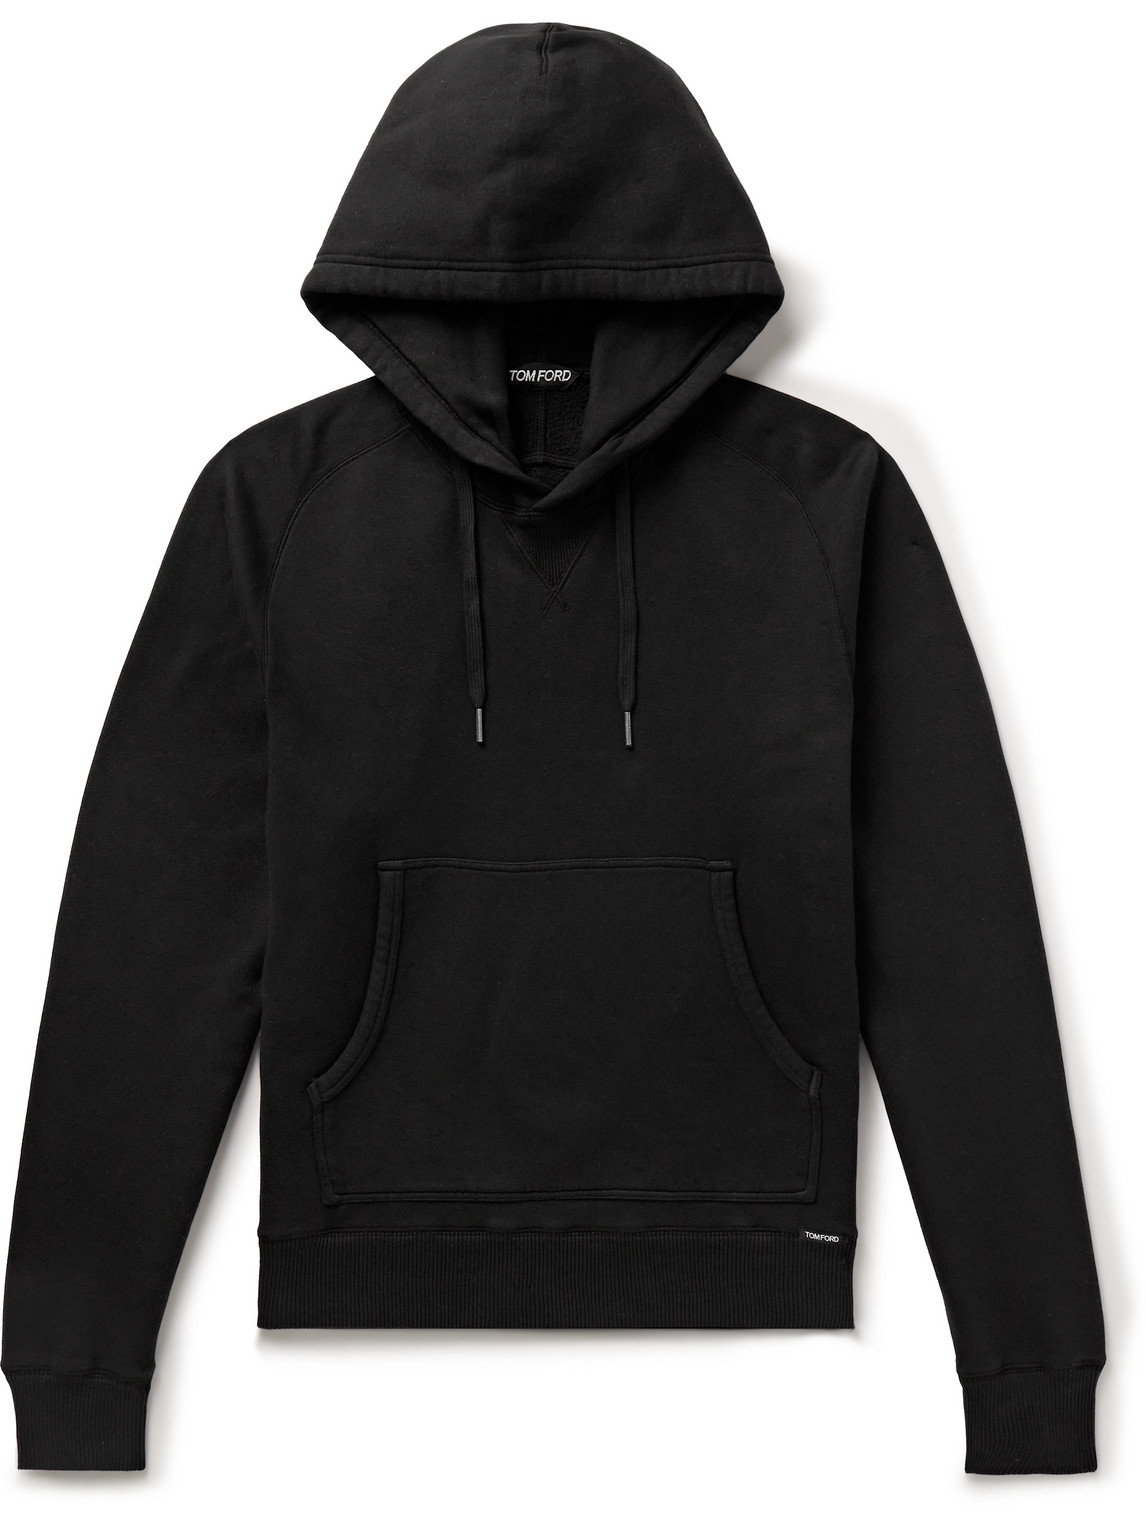 TOM FORD GARMENT-DYED COTTON-JERSEY HOODIE